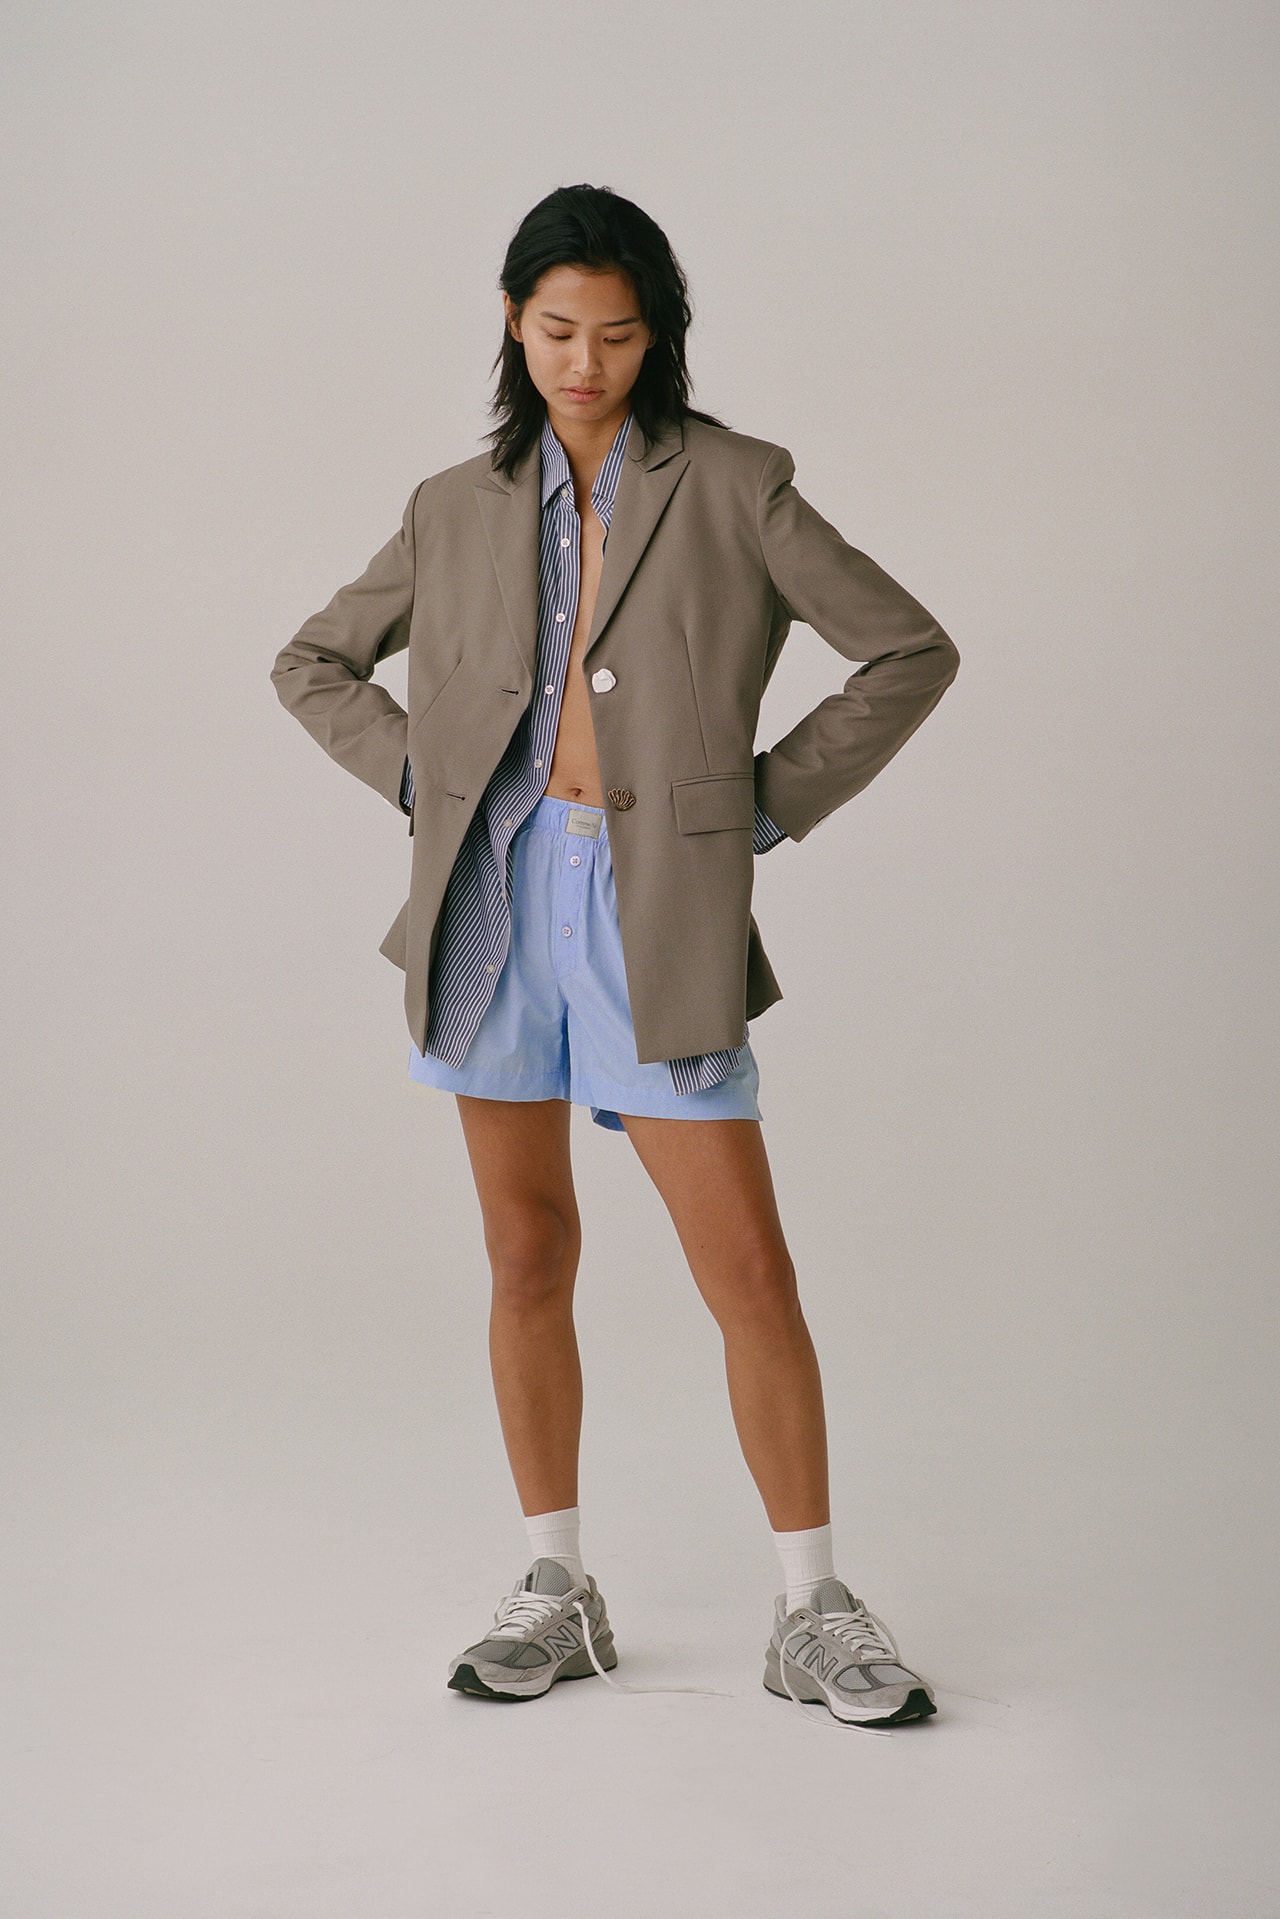 Comme Si Launches New Boxer Shorts for Women